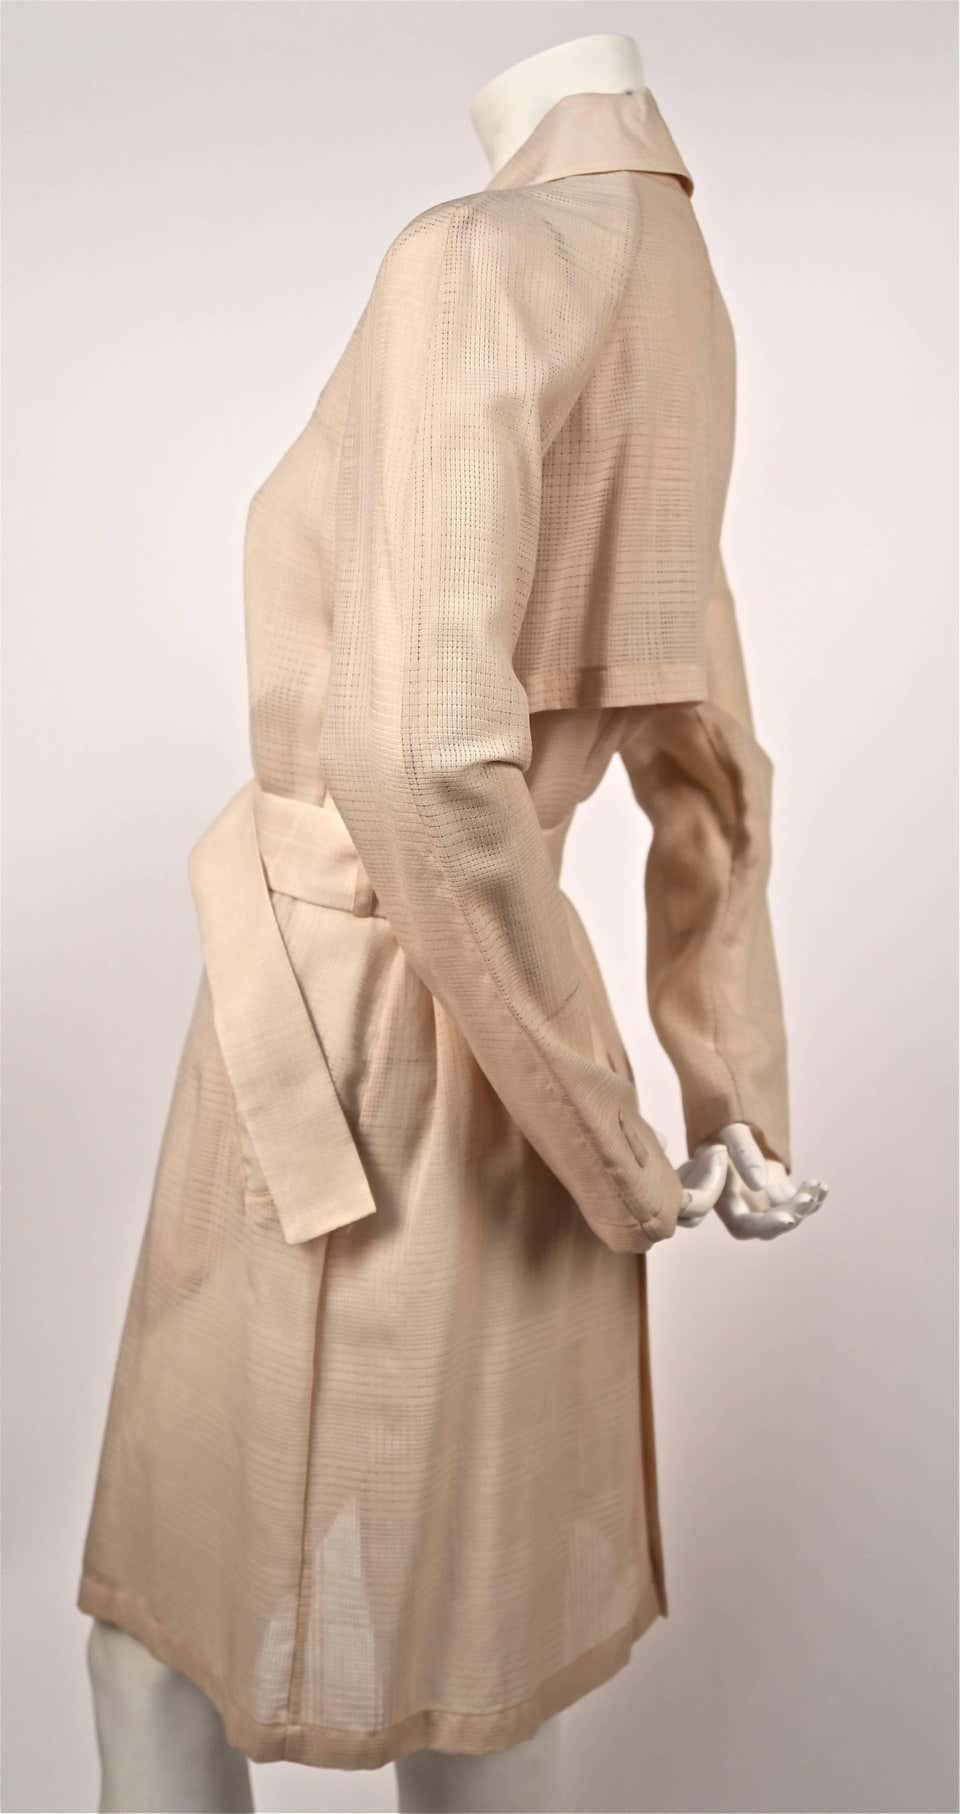 Delicate, dusty-pink , semi-sheer, minimalist trench coat with windowpane woven fabric designed by Helmut Lang dating to spring of 1997. Italian size 40. Approximate measurements: shoulder 16